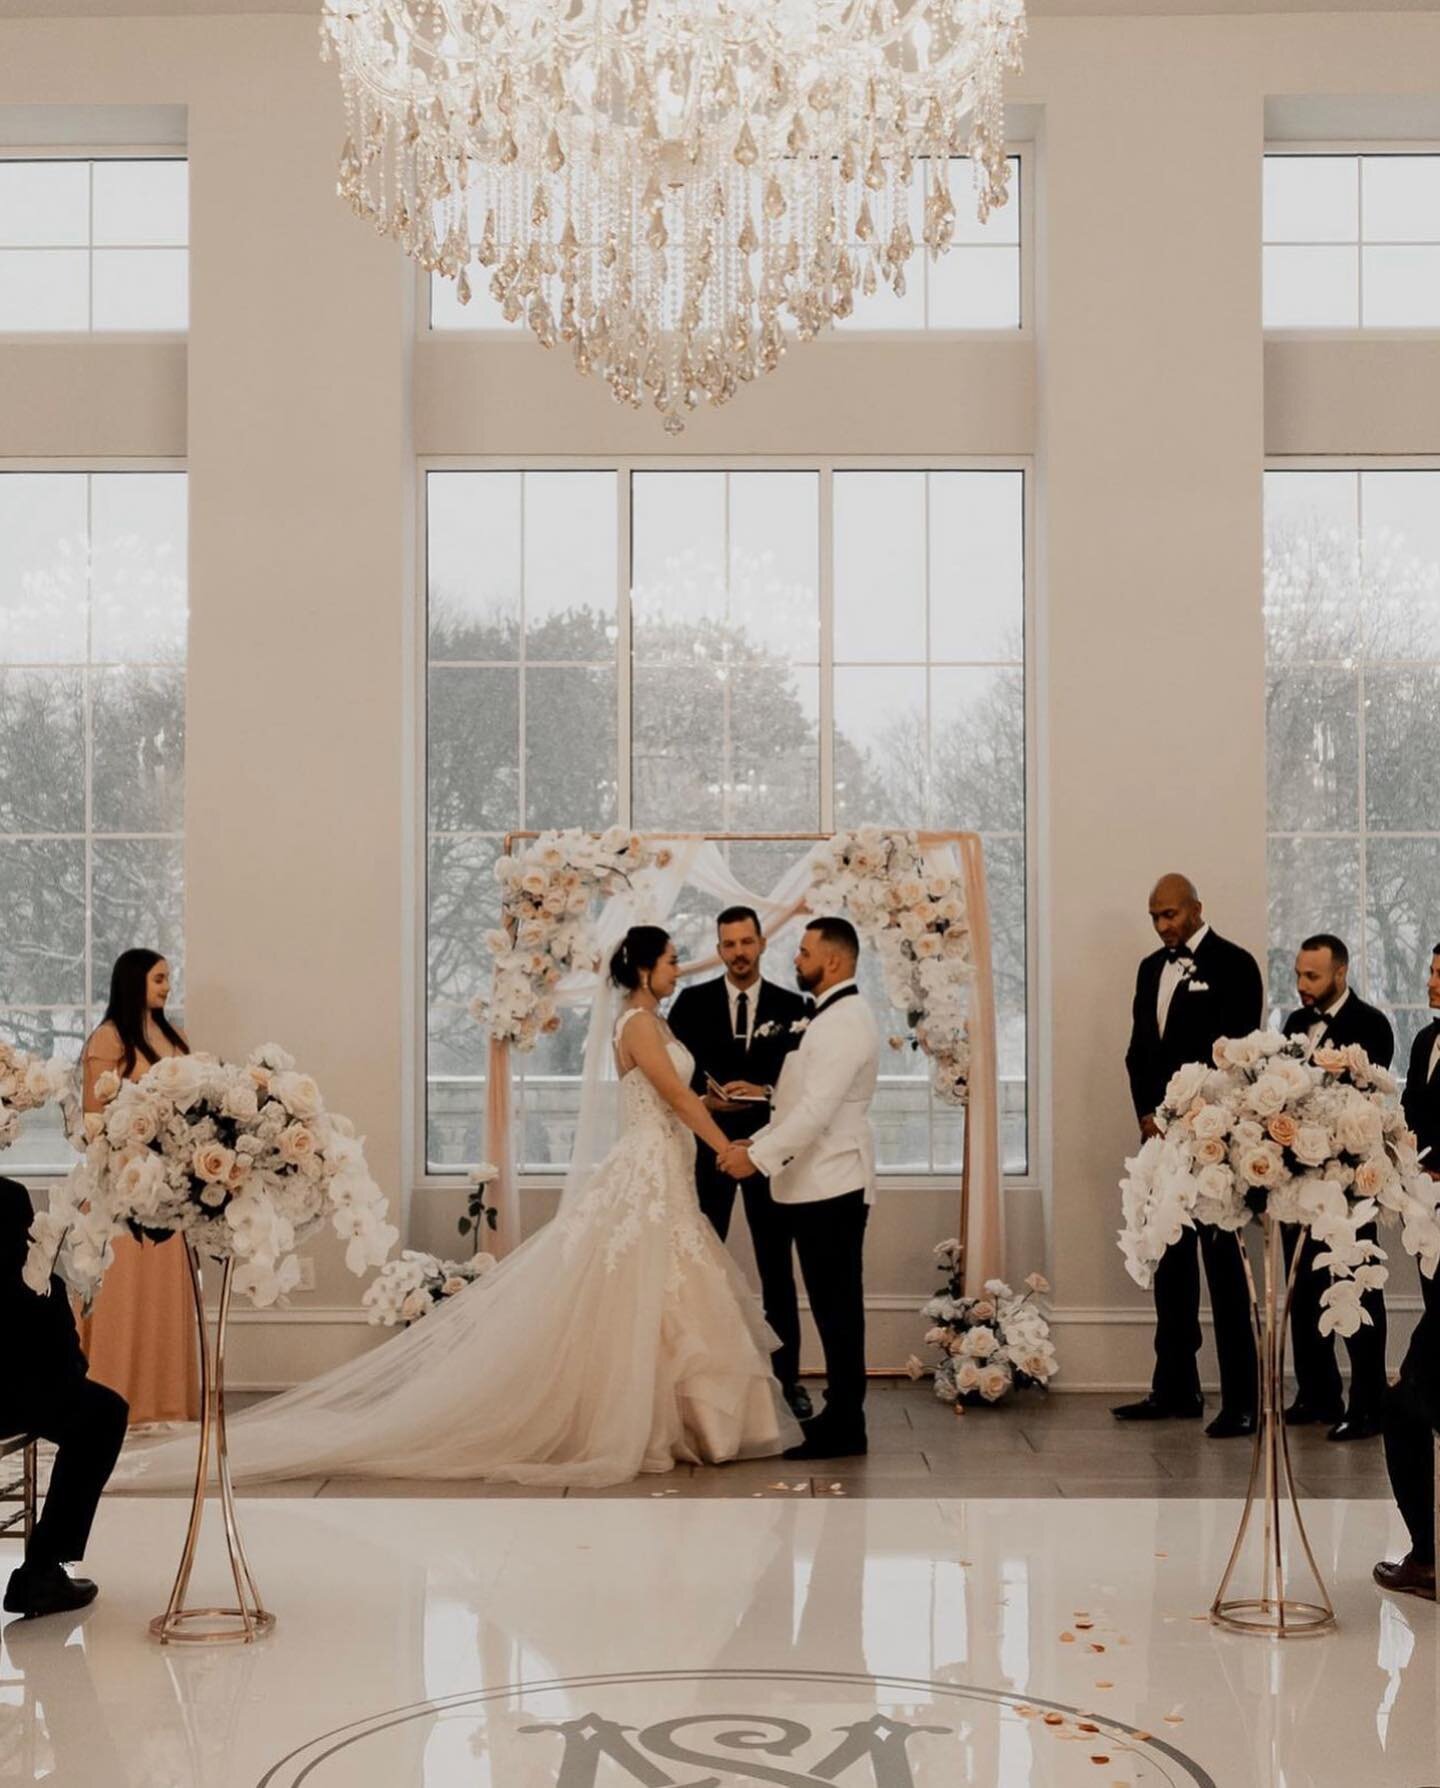 Anyone remember Valentine&rsquo;s Day 2021? We do! North Texas was in the middle of a Winter Storm that turned @theolanatx into a Winter Wonderland giving Sunny + Moises a picturesque snow-covered backdrop to celebrate their love. And here we are two